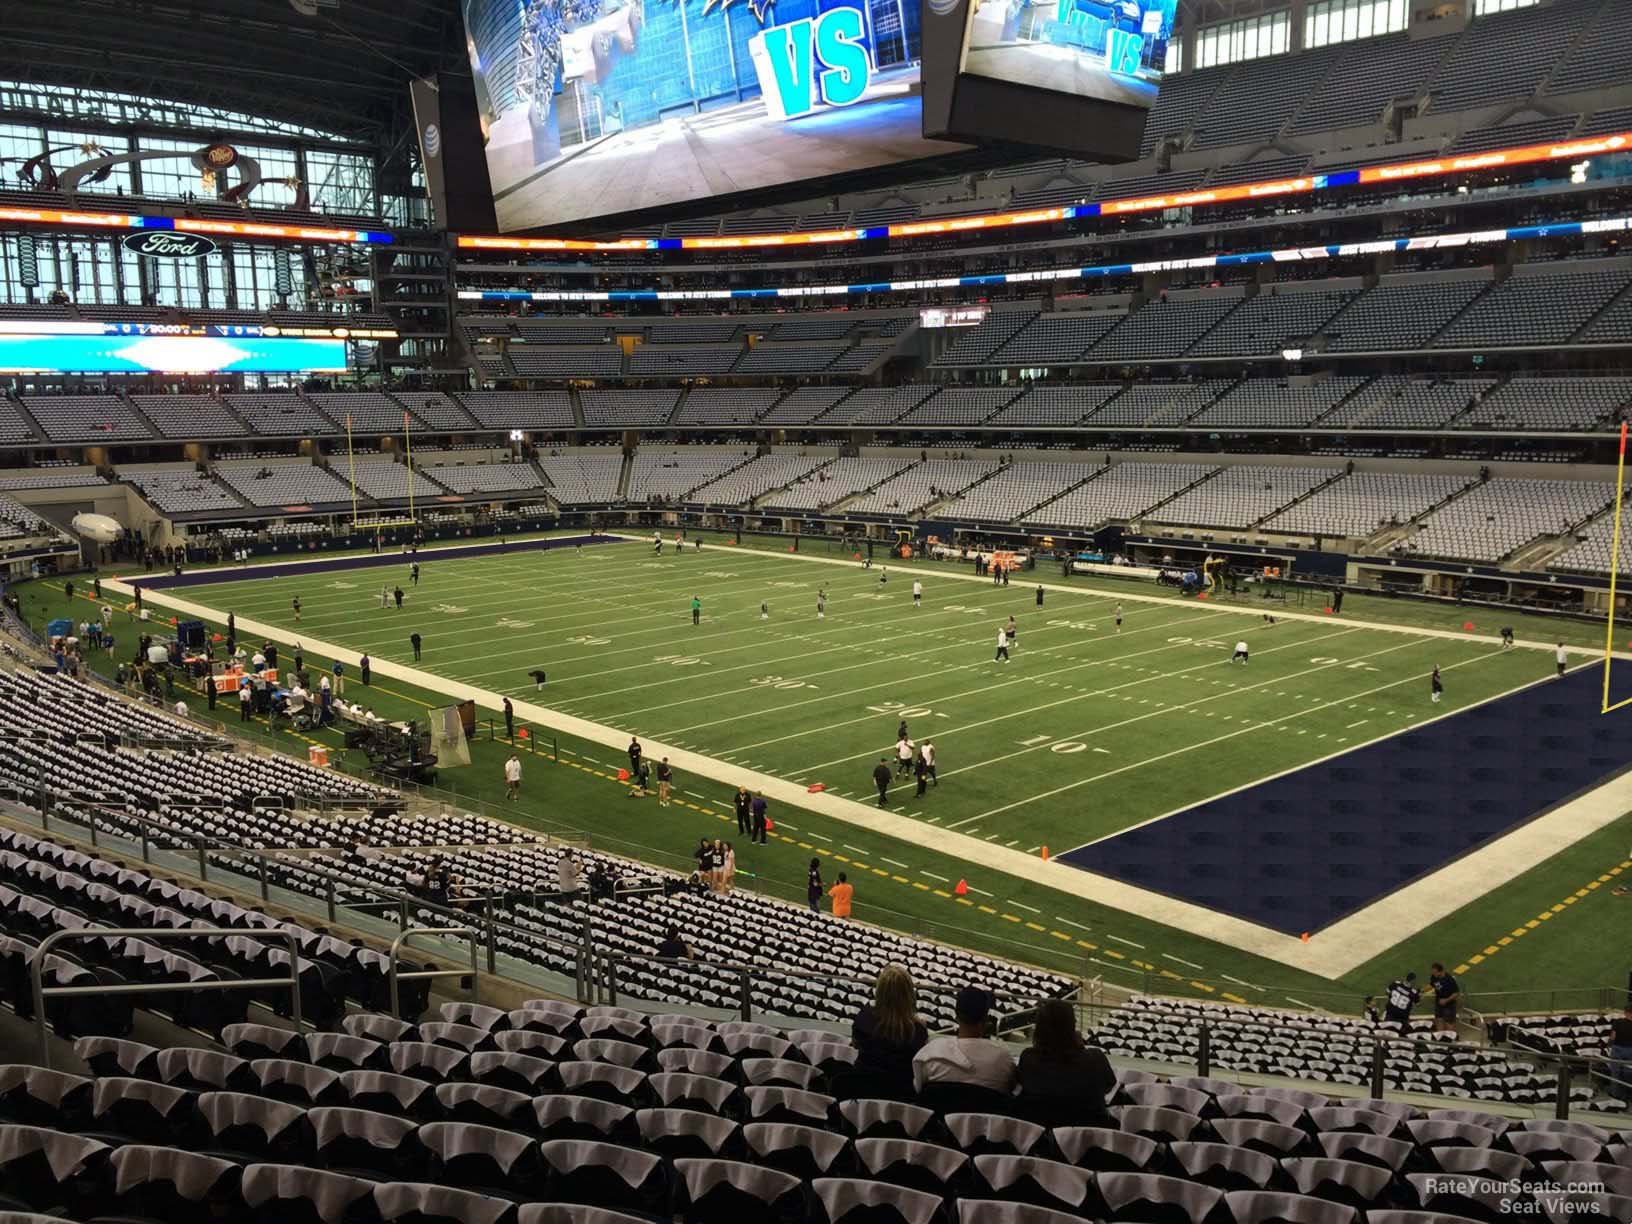 section 227, row 13 seat view  for football - at&t stadium (cowboys stadium)